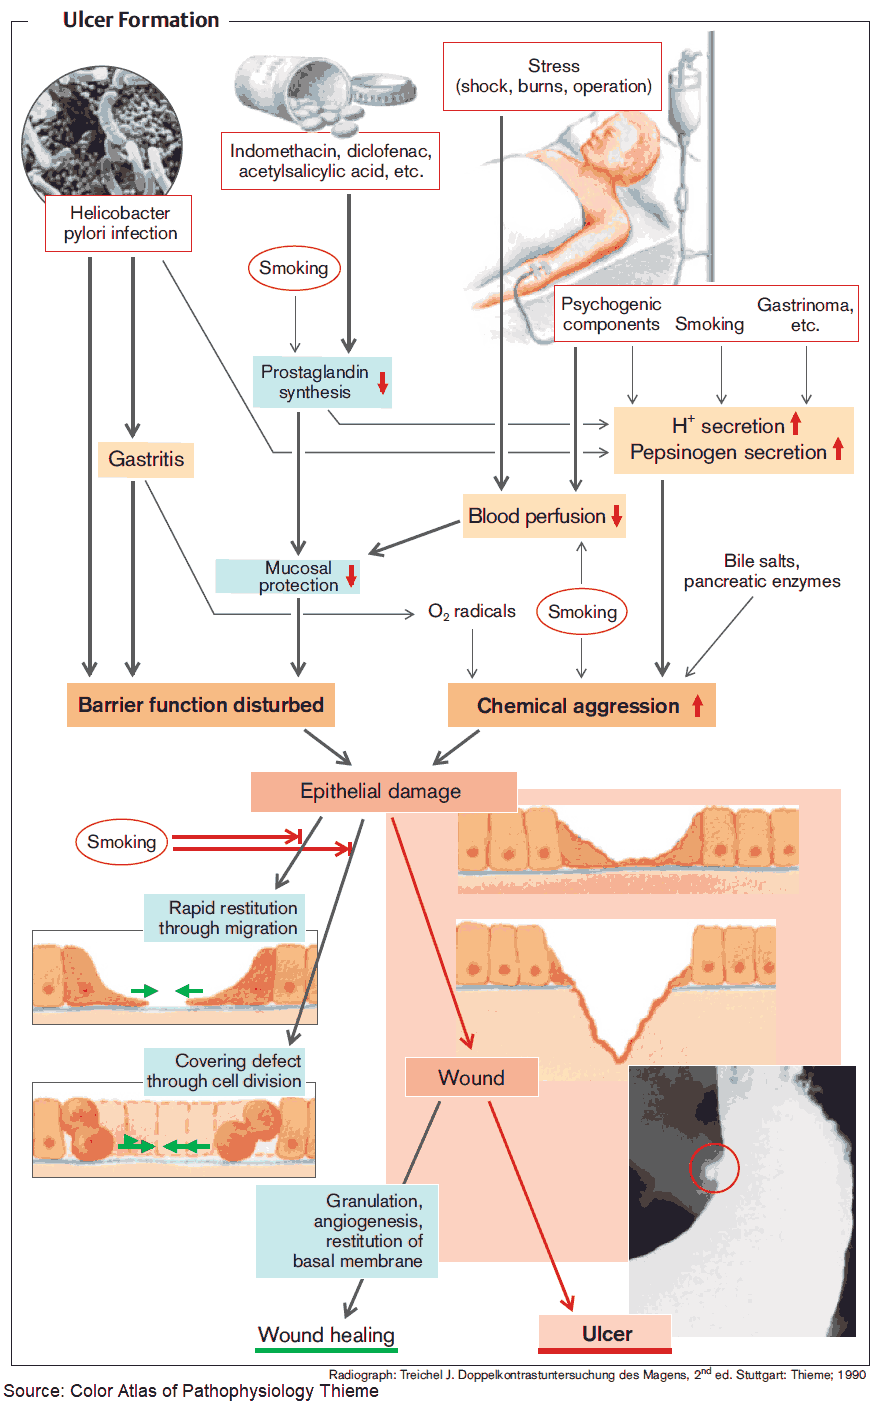 Pathophysiology of Gastric Ulcer Formation